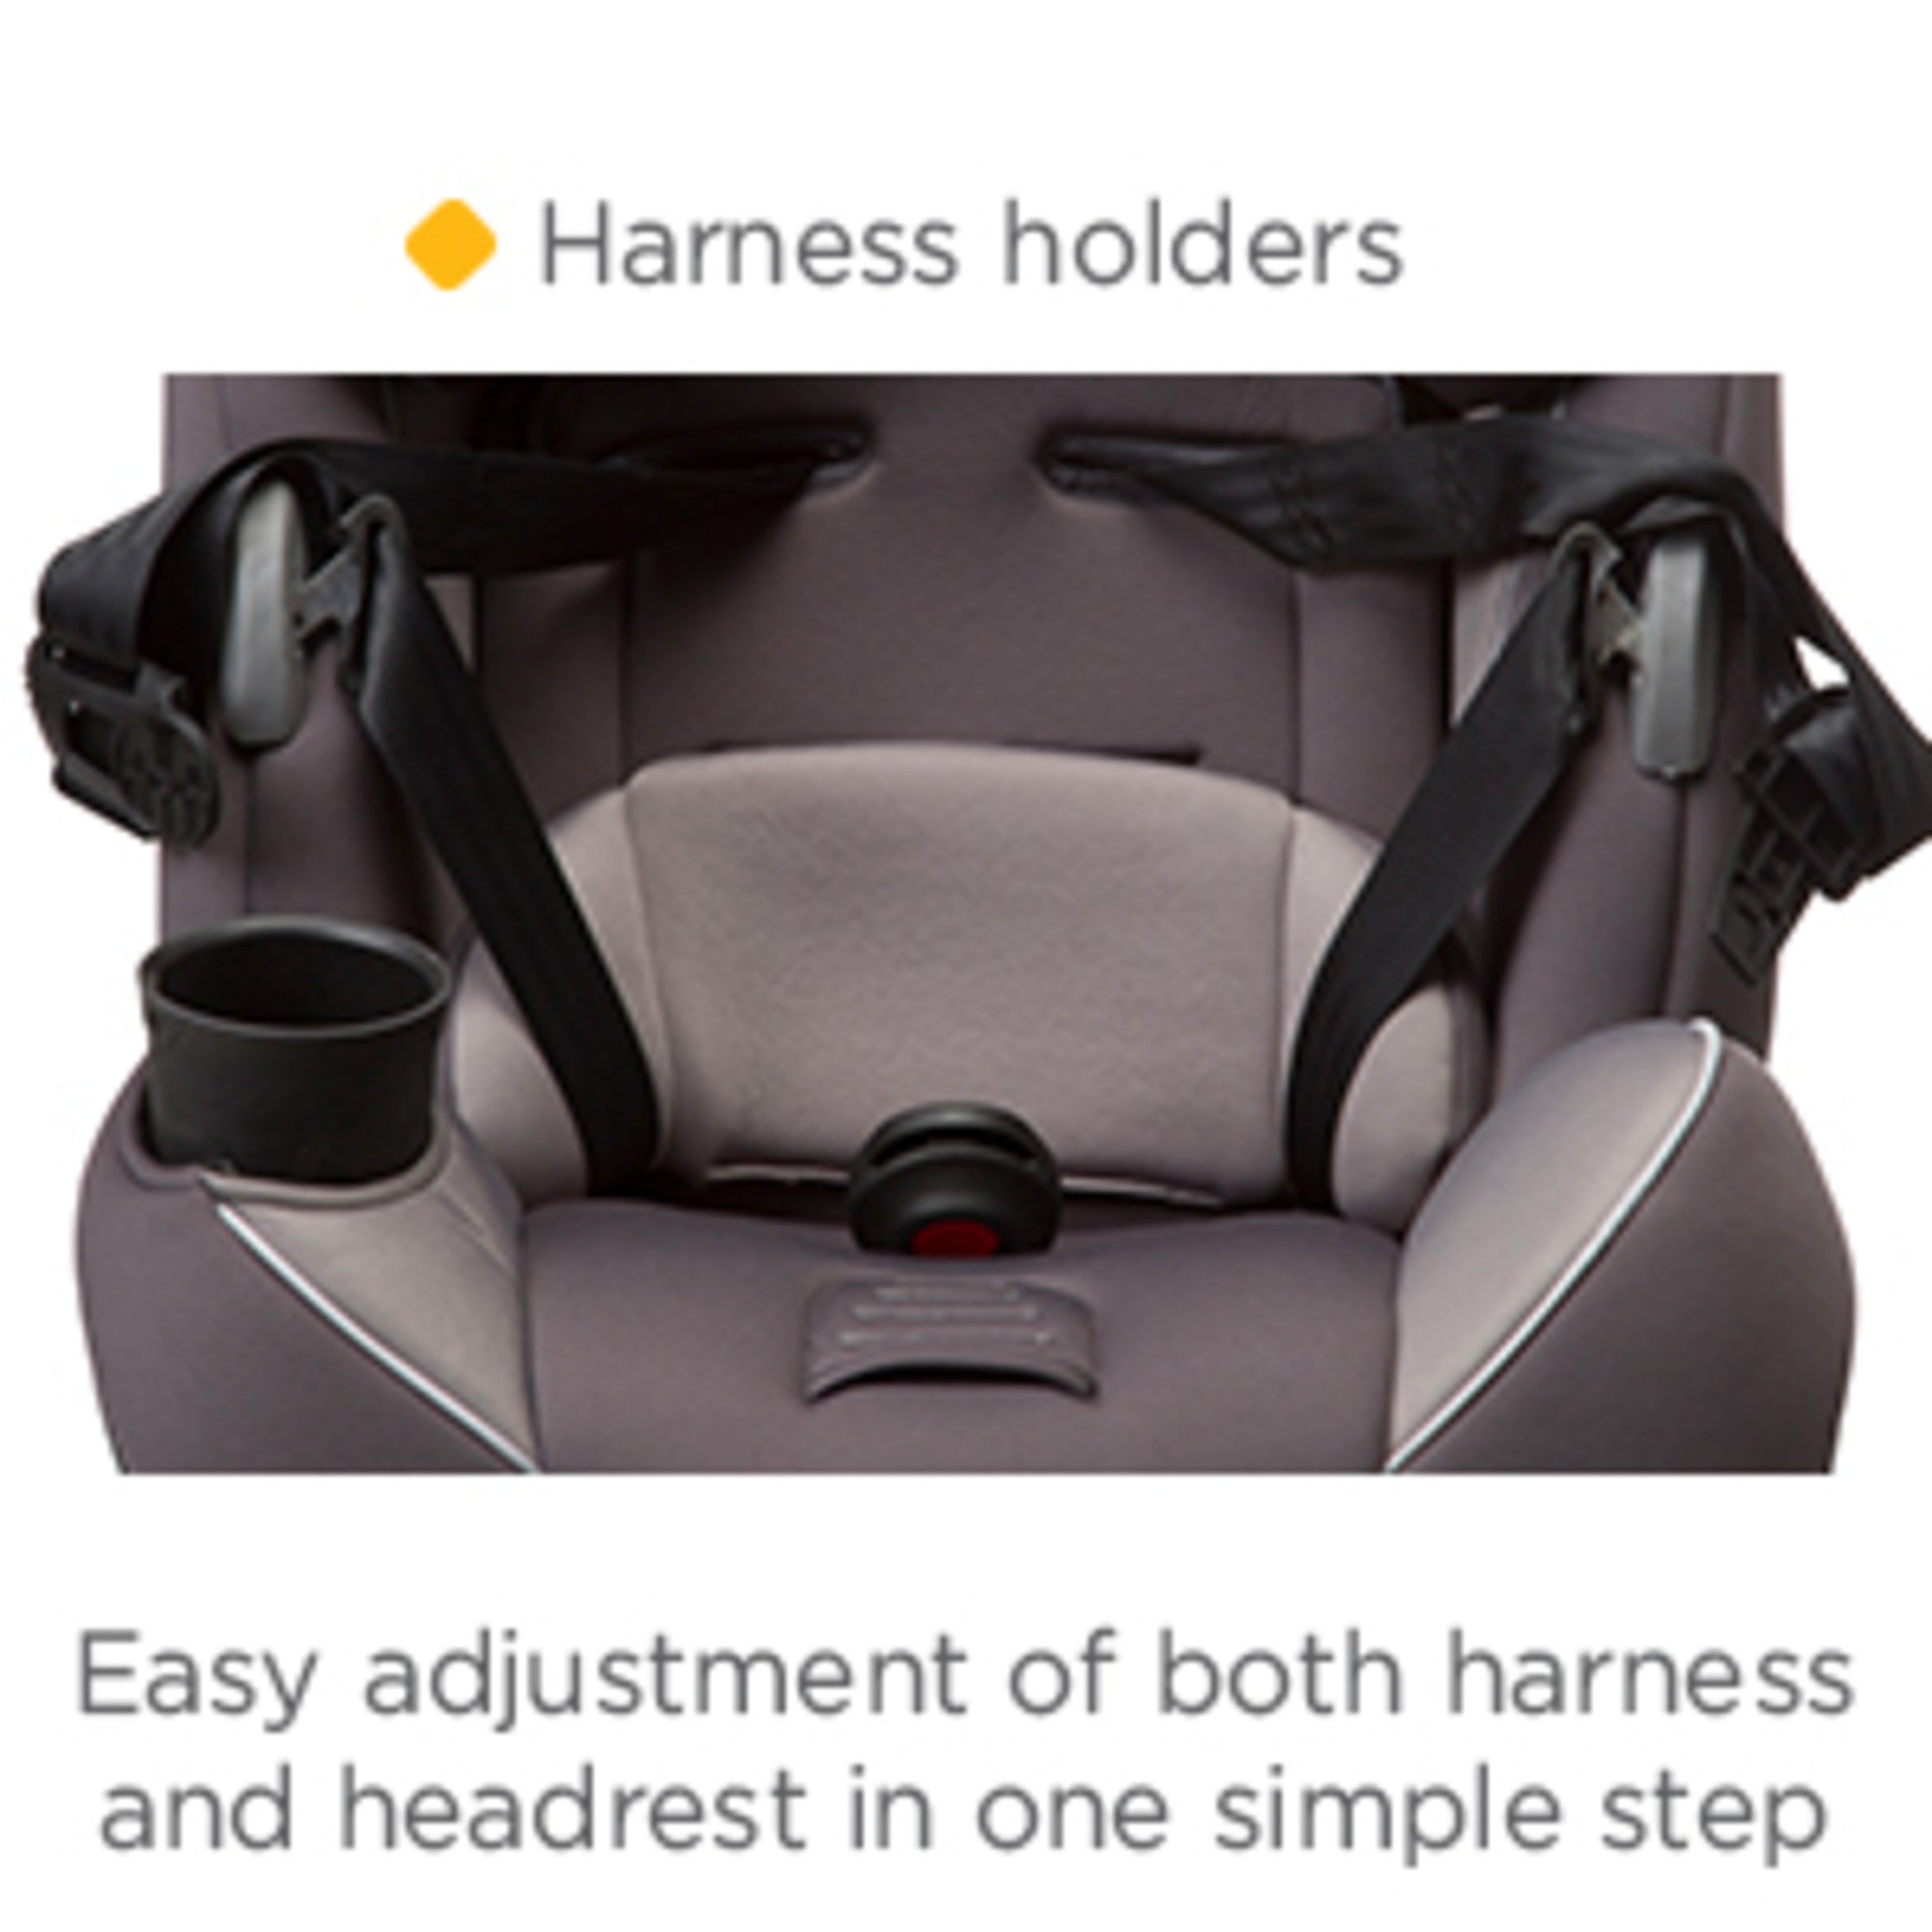 Car seat with Harness Holders with easy adjustment of both harness and headrest in one simple step.